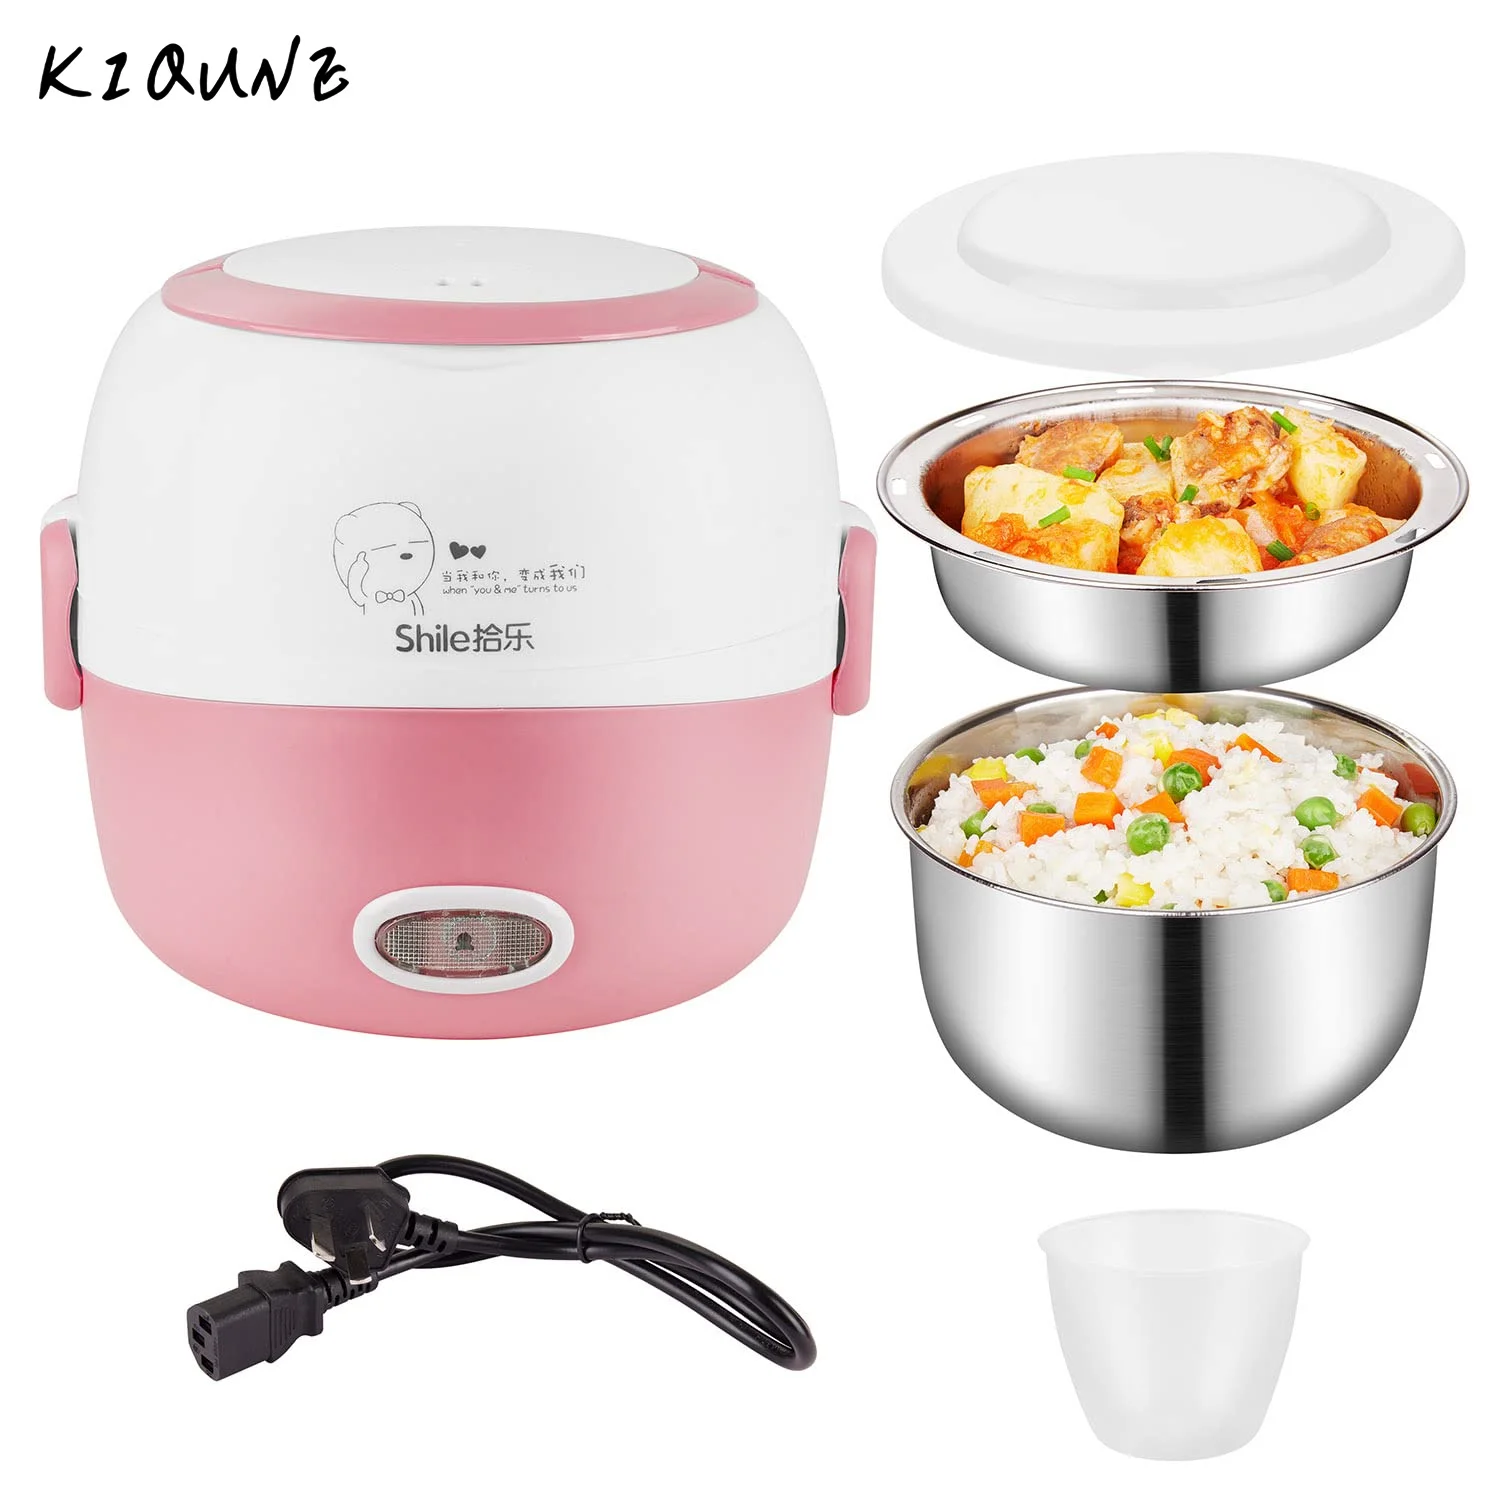 

Electric Lunch Box- 110V 200W Removable Stainless Steel Food Heating Rice Cooker - with Bowl, Plate, Measuring Cup